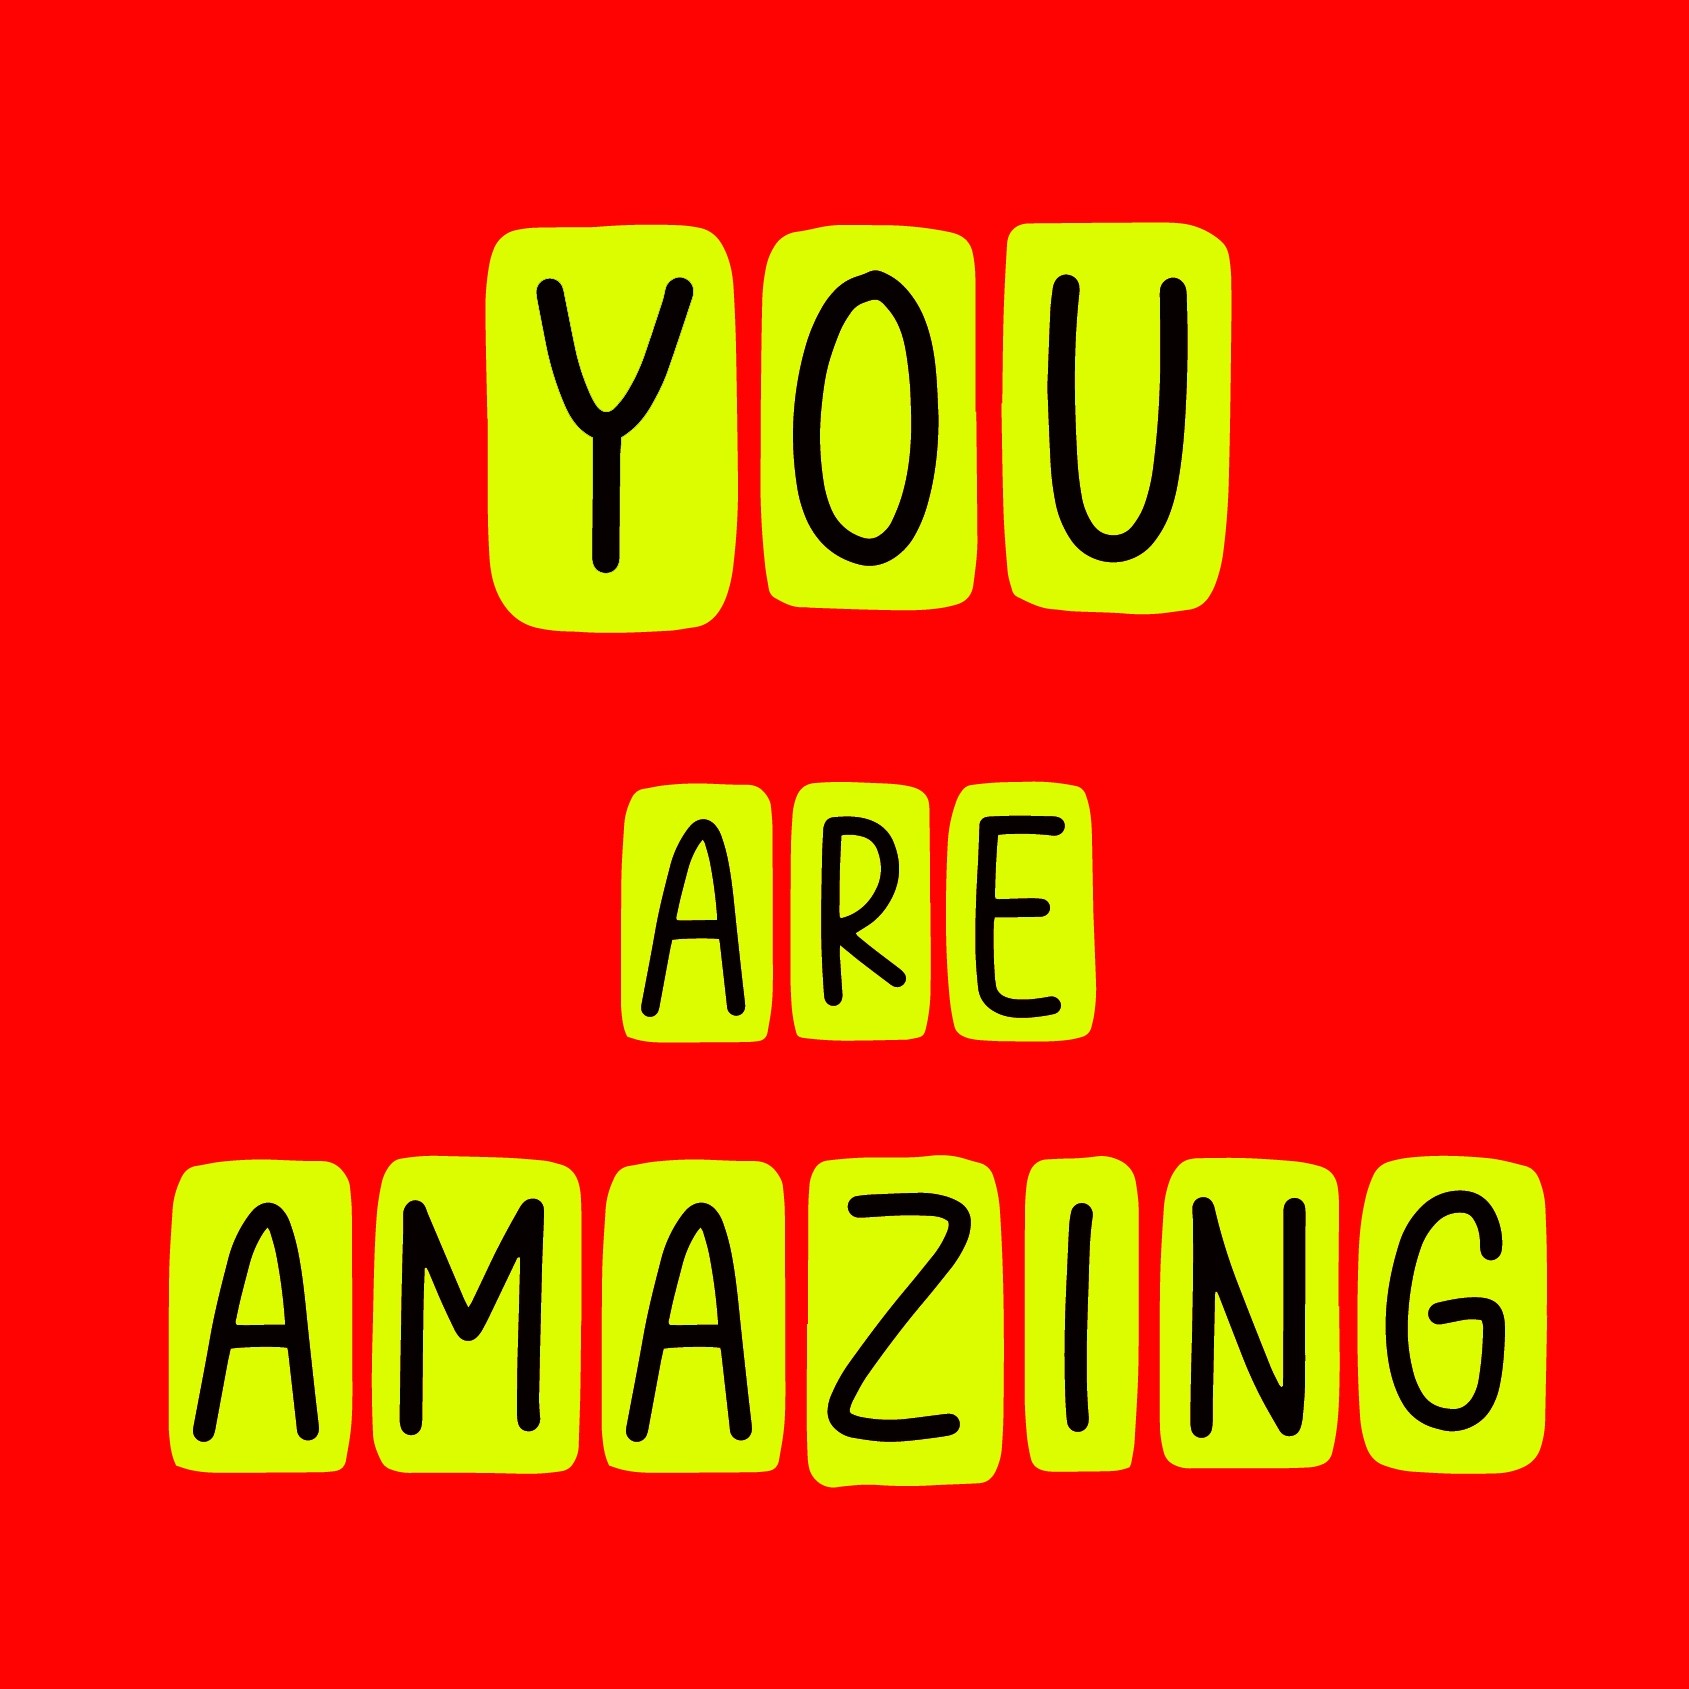 Inspirational Motivational Greeting Card (You Are Amazing)